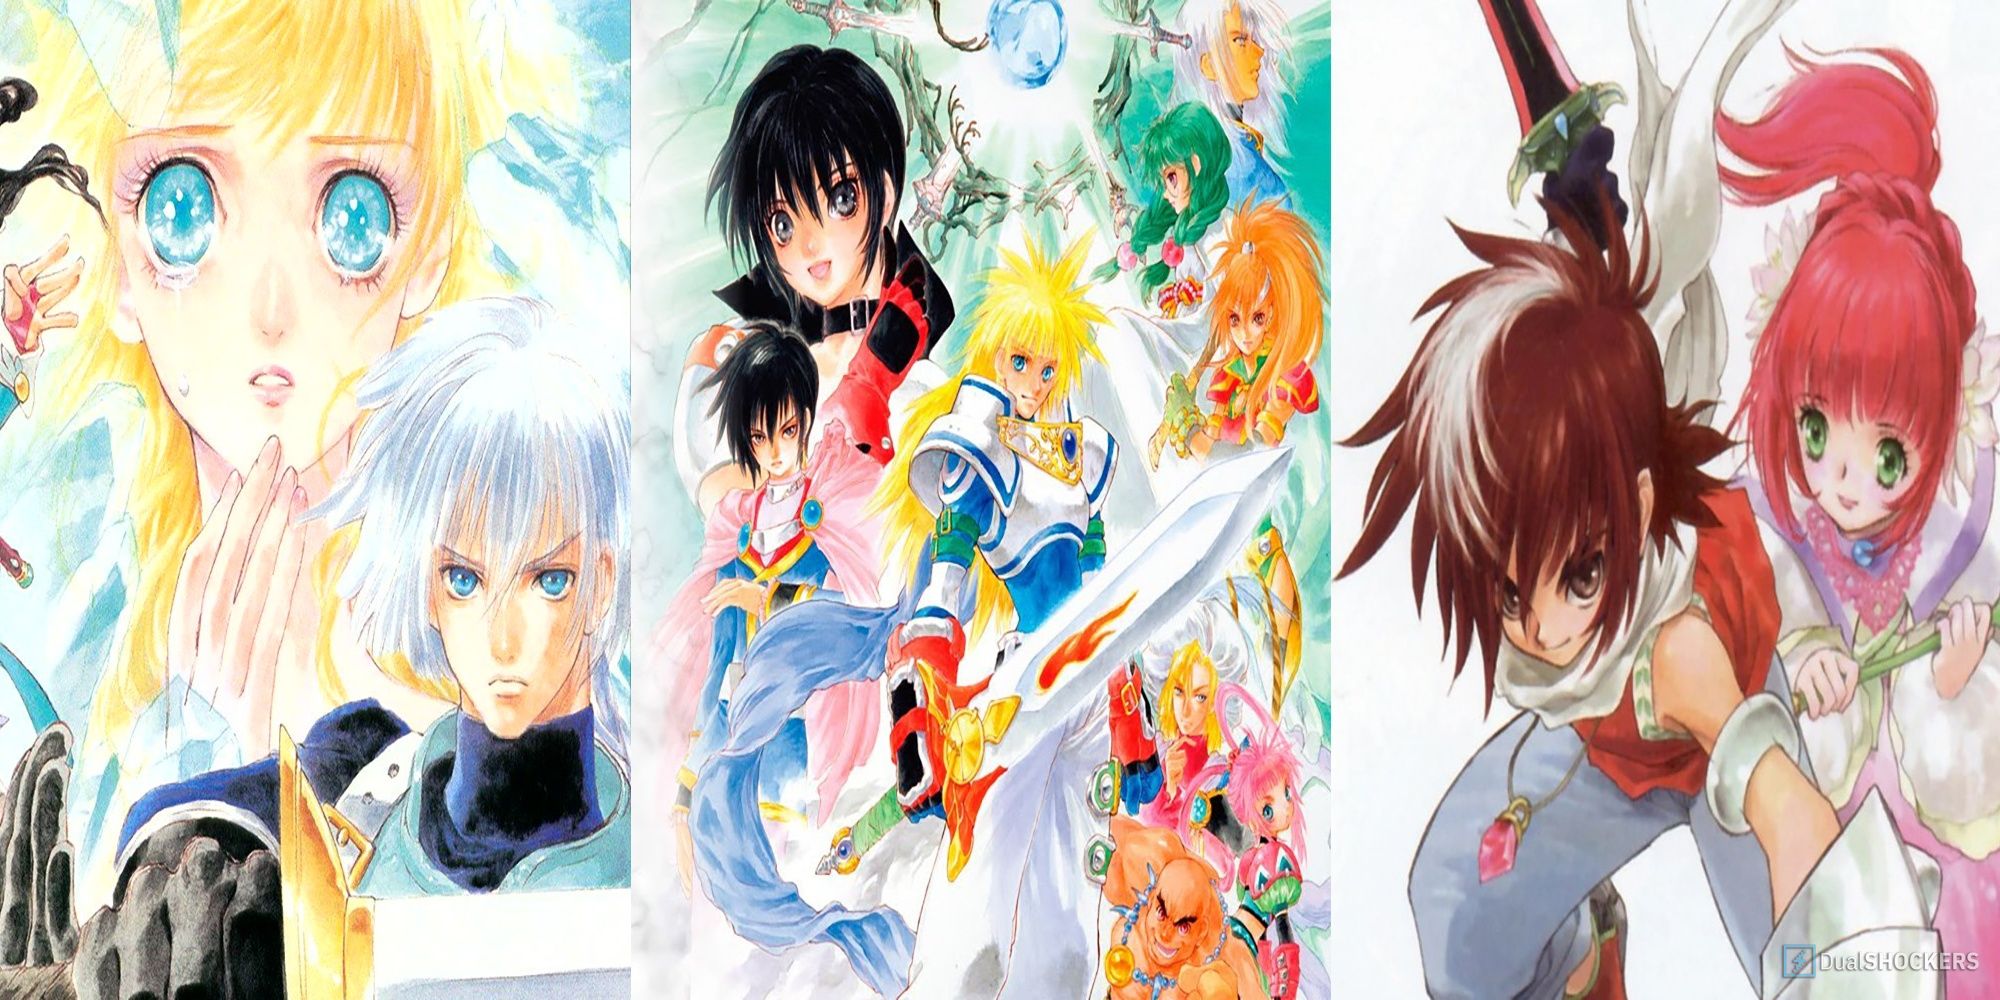 Water Color Cover Art Of The Heroes From Tales Of Rebirth, Tales Of Destiny, And Tales Of The Tempest